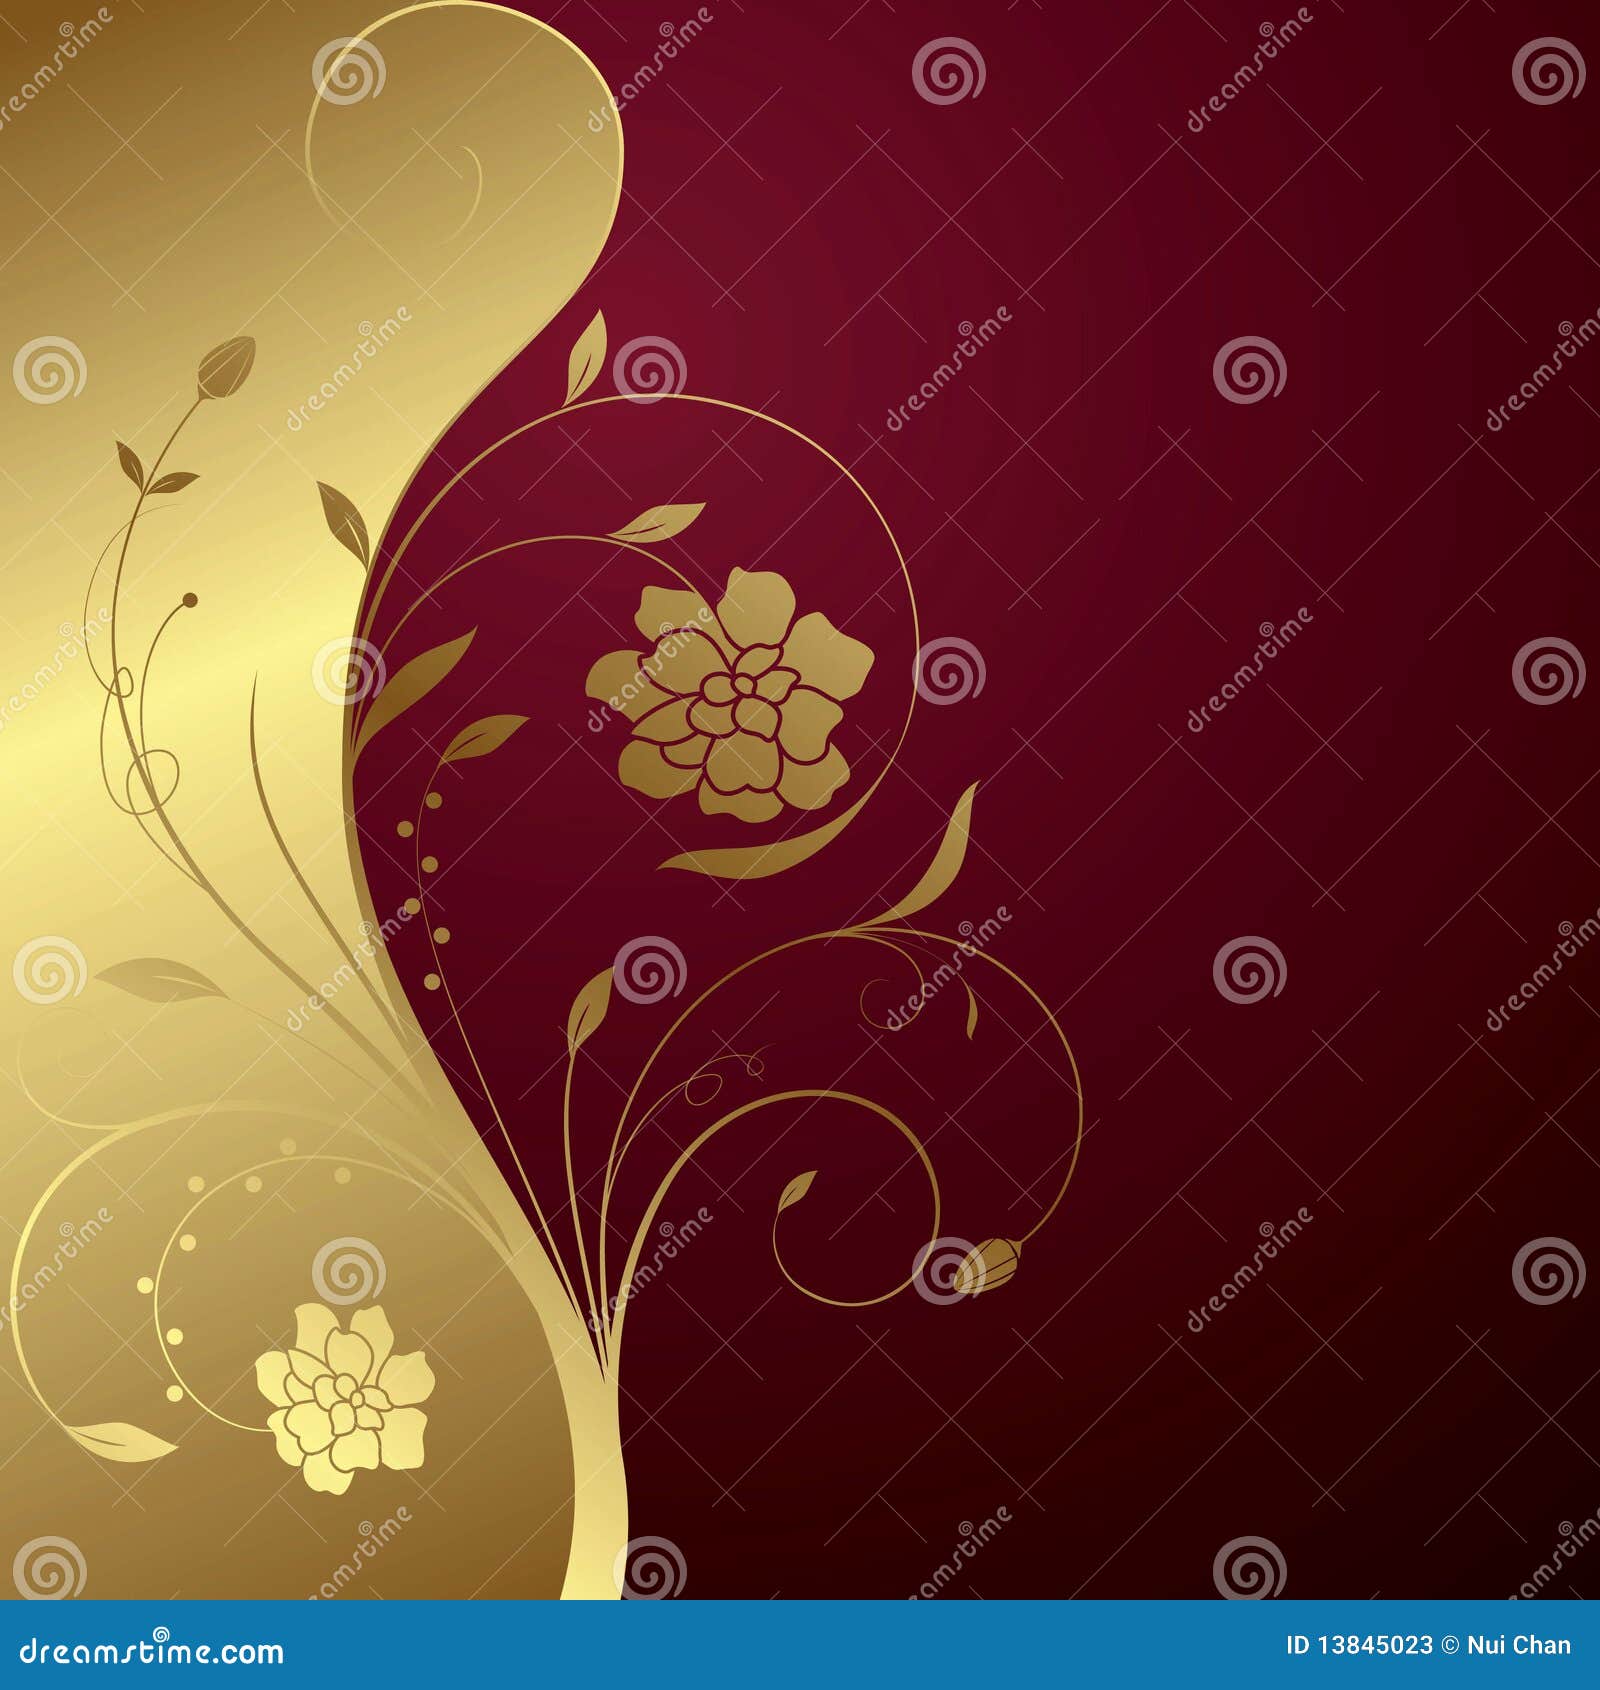 Abstract Floral stock vector. Illustration of petal, heart - 13845023